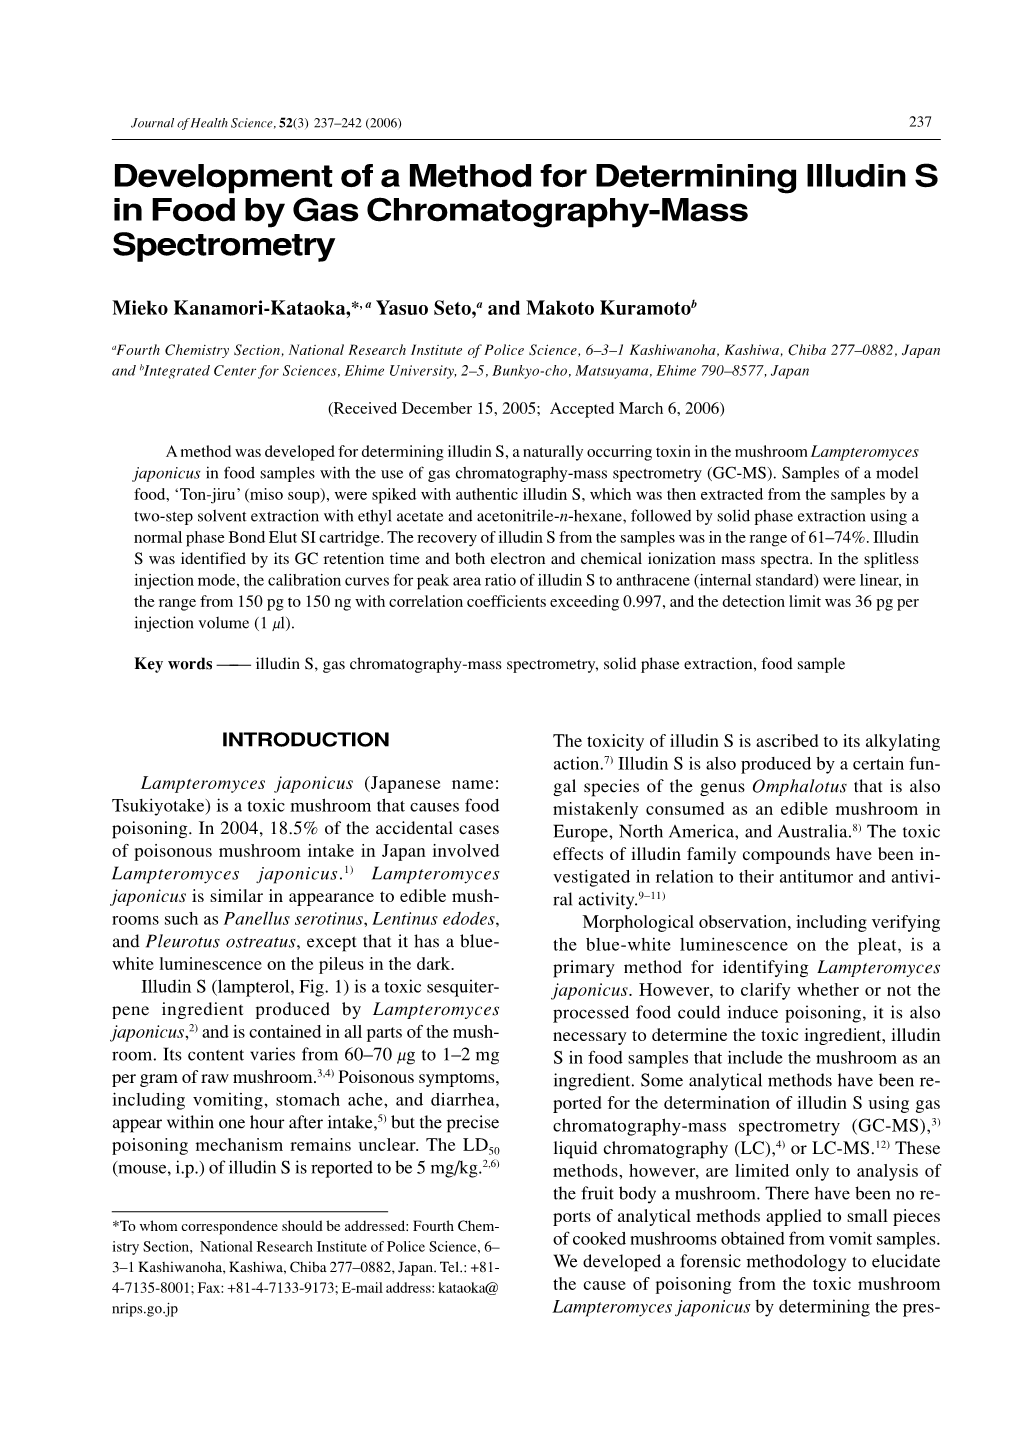 Development of a Method for Determining Illudin S in Food by Gas Chromatography-Mass Spectrometry